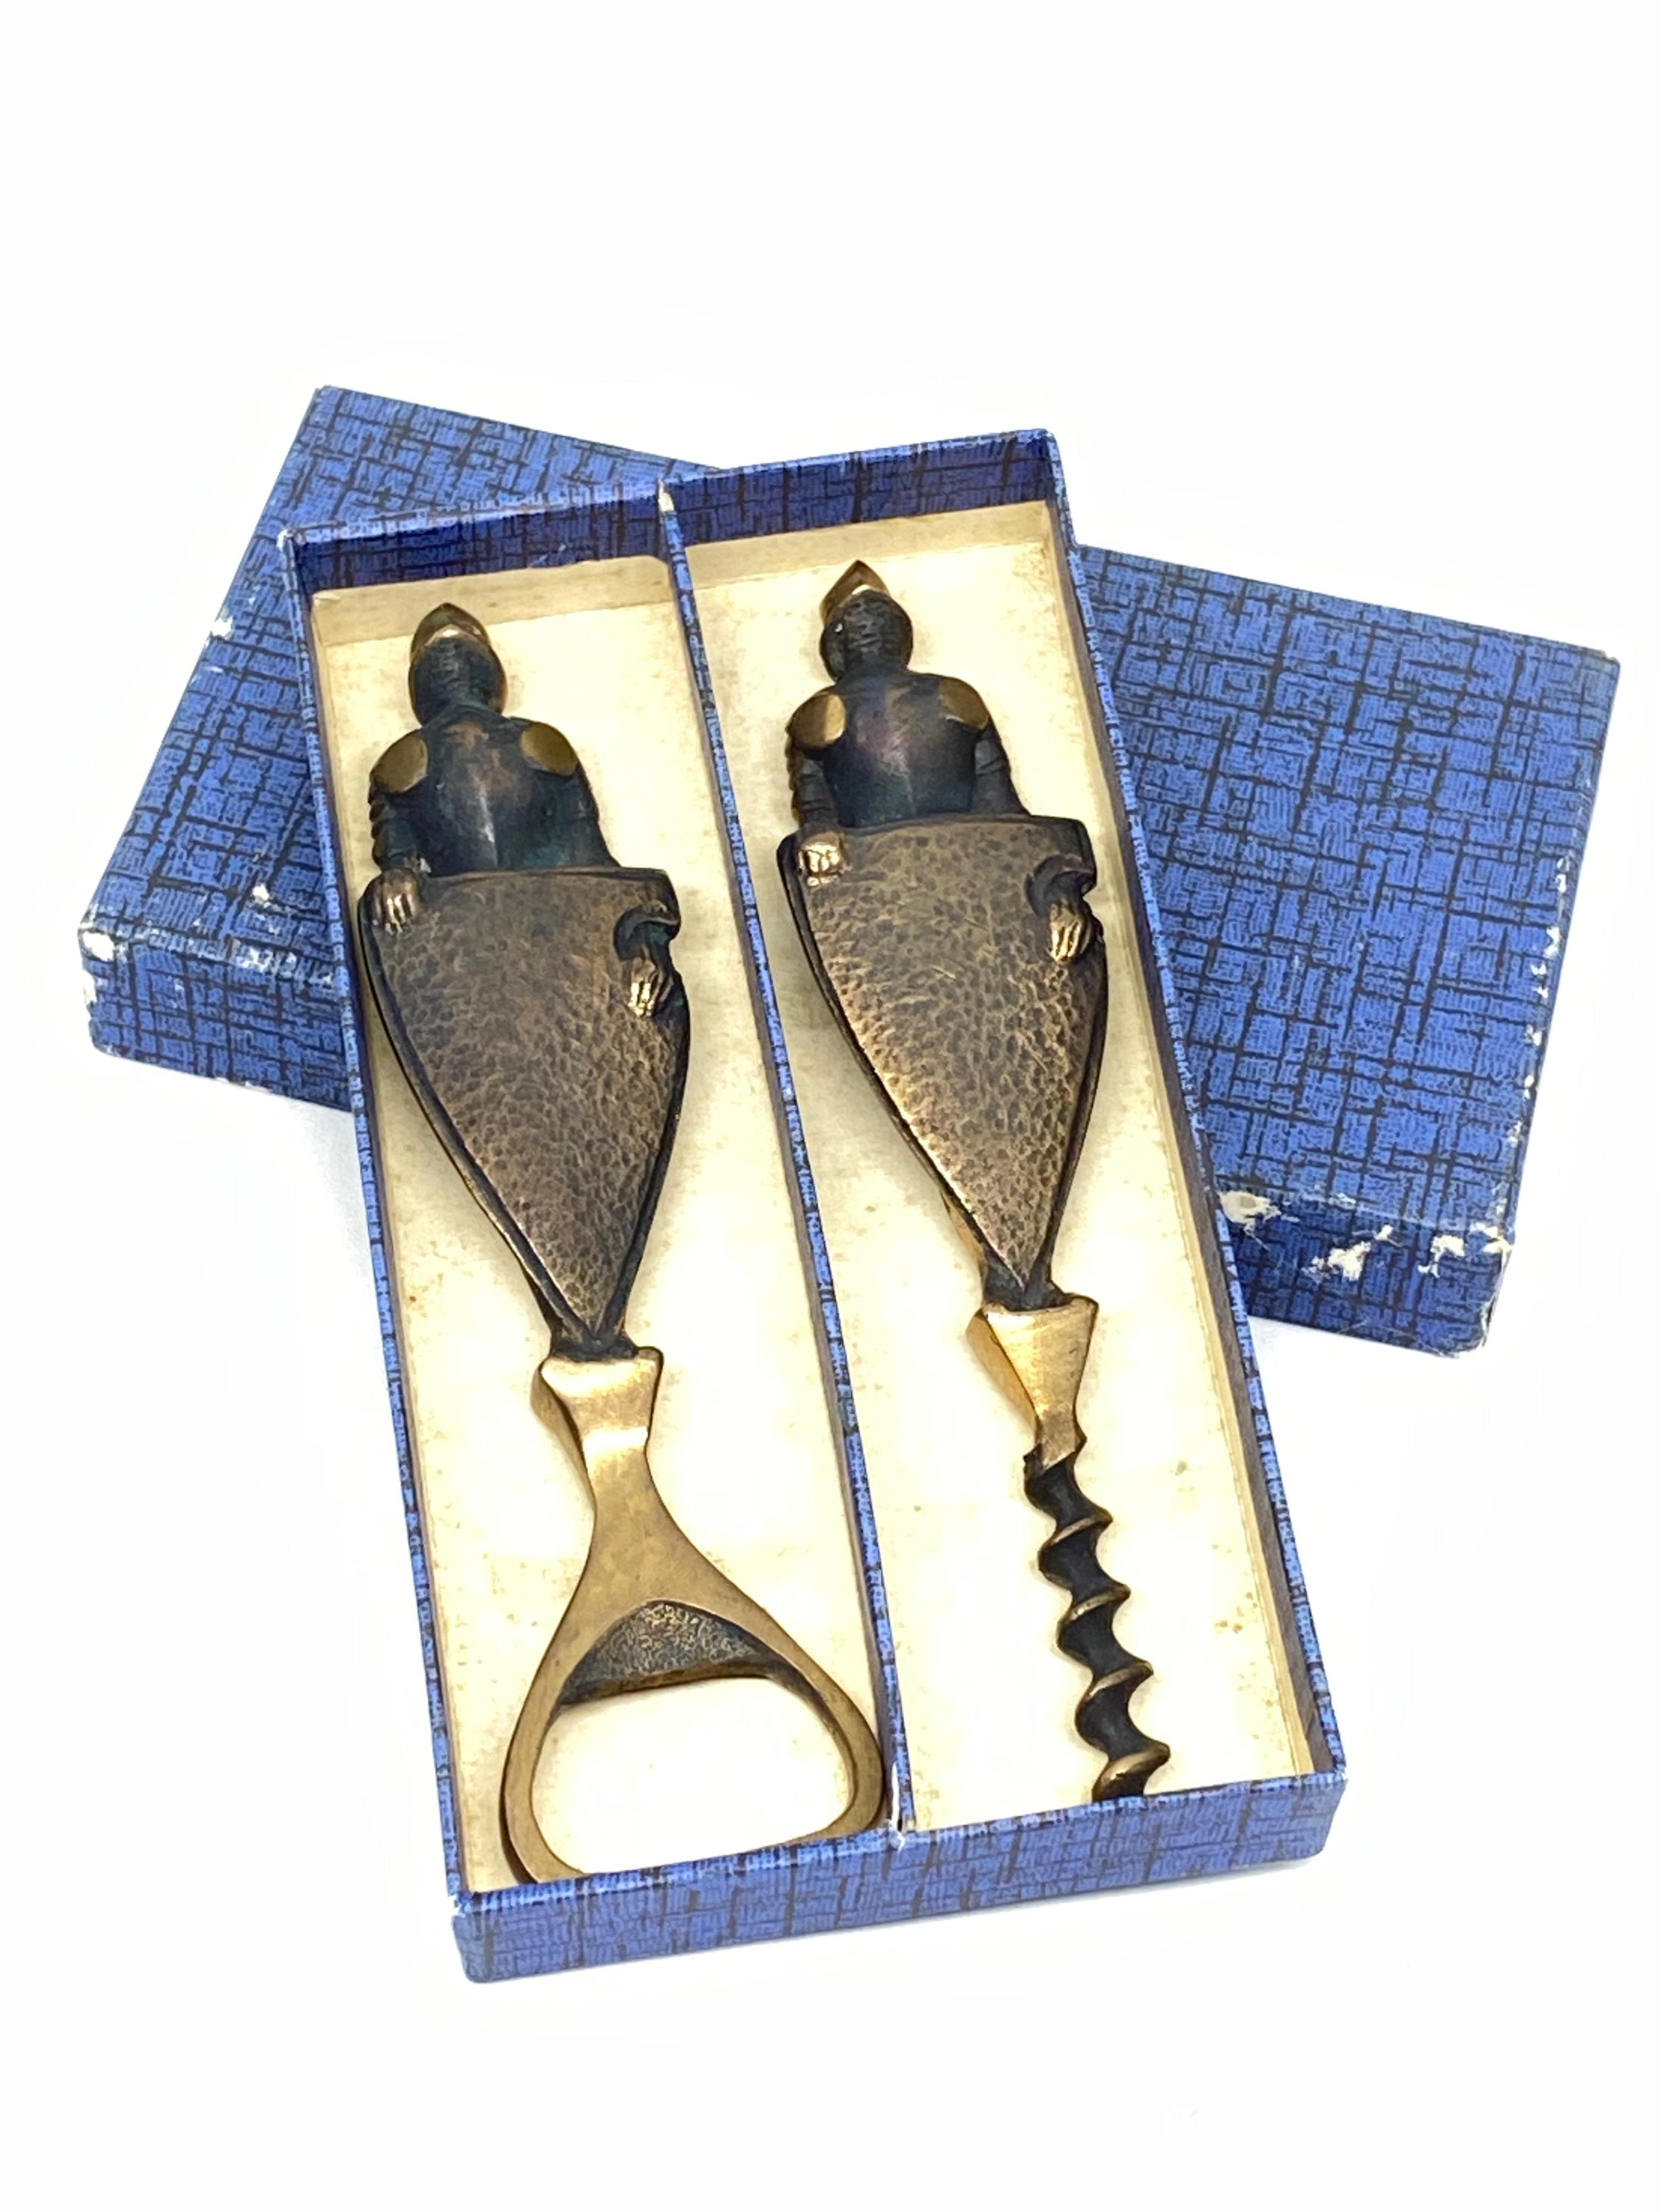 Classic early 1950s corkscrew and bottle opener in the old original box. Nice addition to your bar, bar cart or just for your collection. It comes in the original old box, box with minor signs of wear as expected with age and use, like seen in